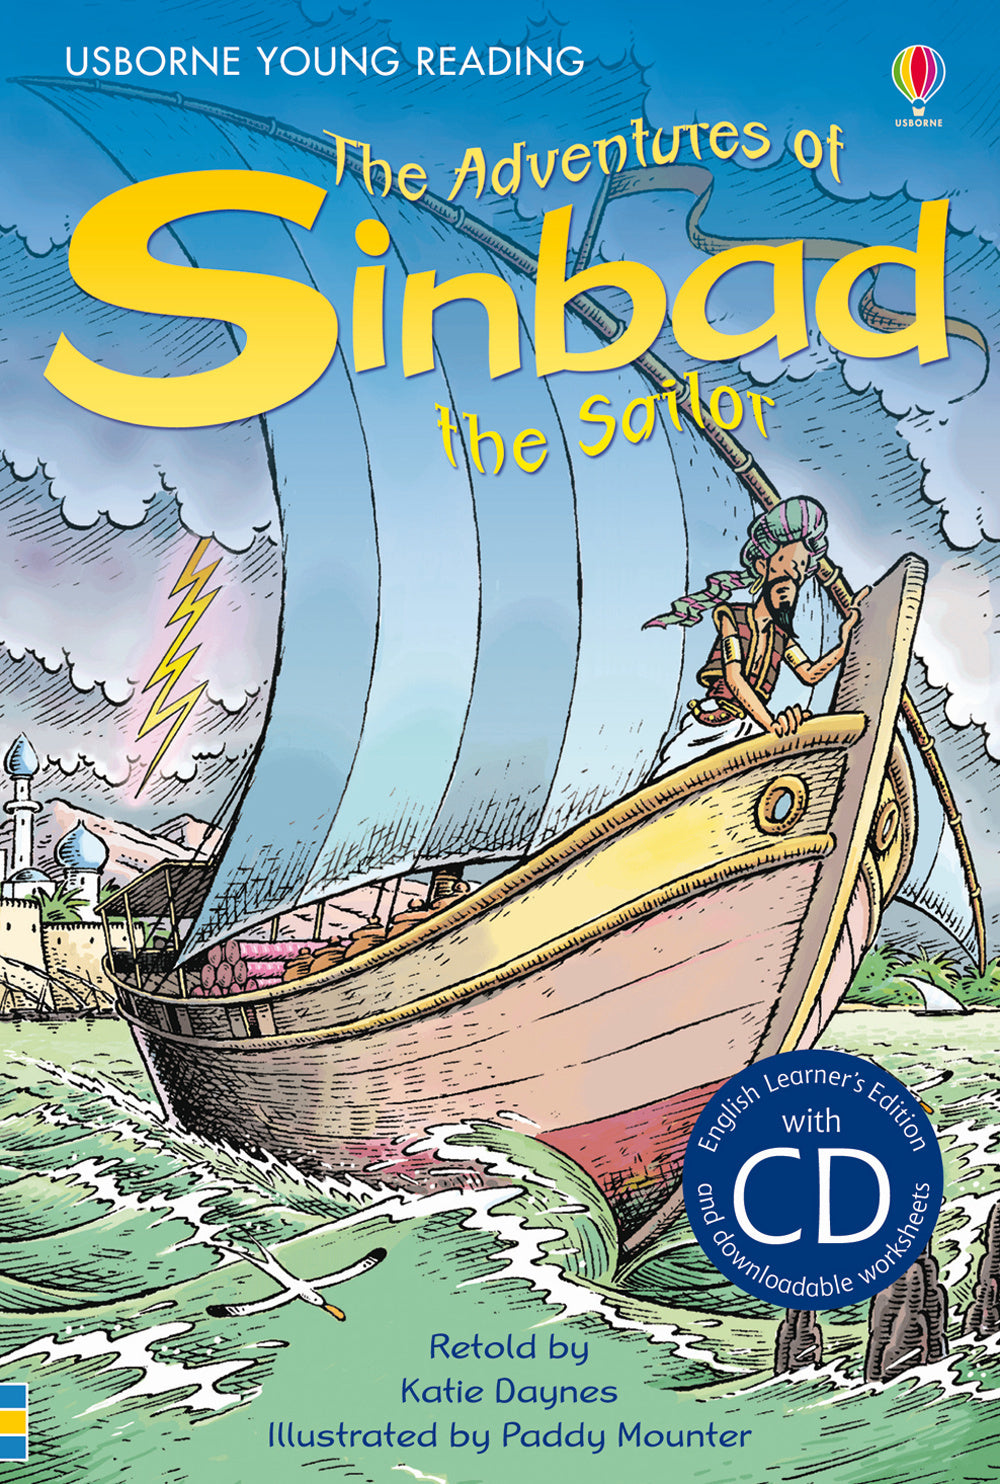 The adventures of sinbad the sailor.